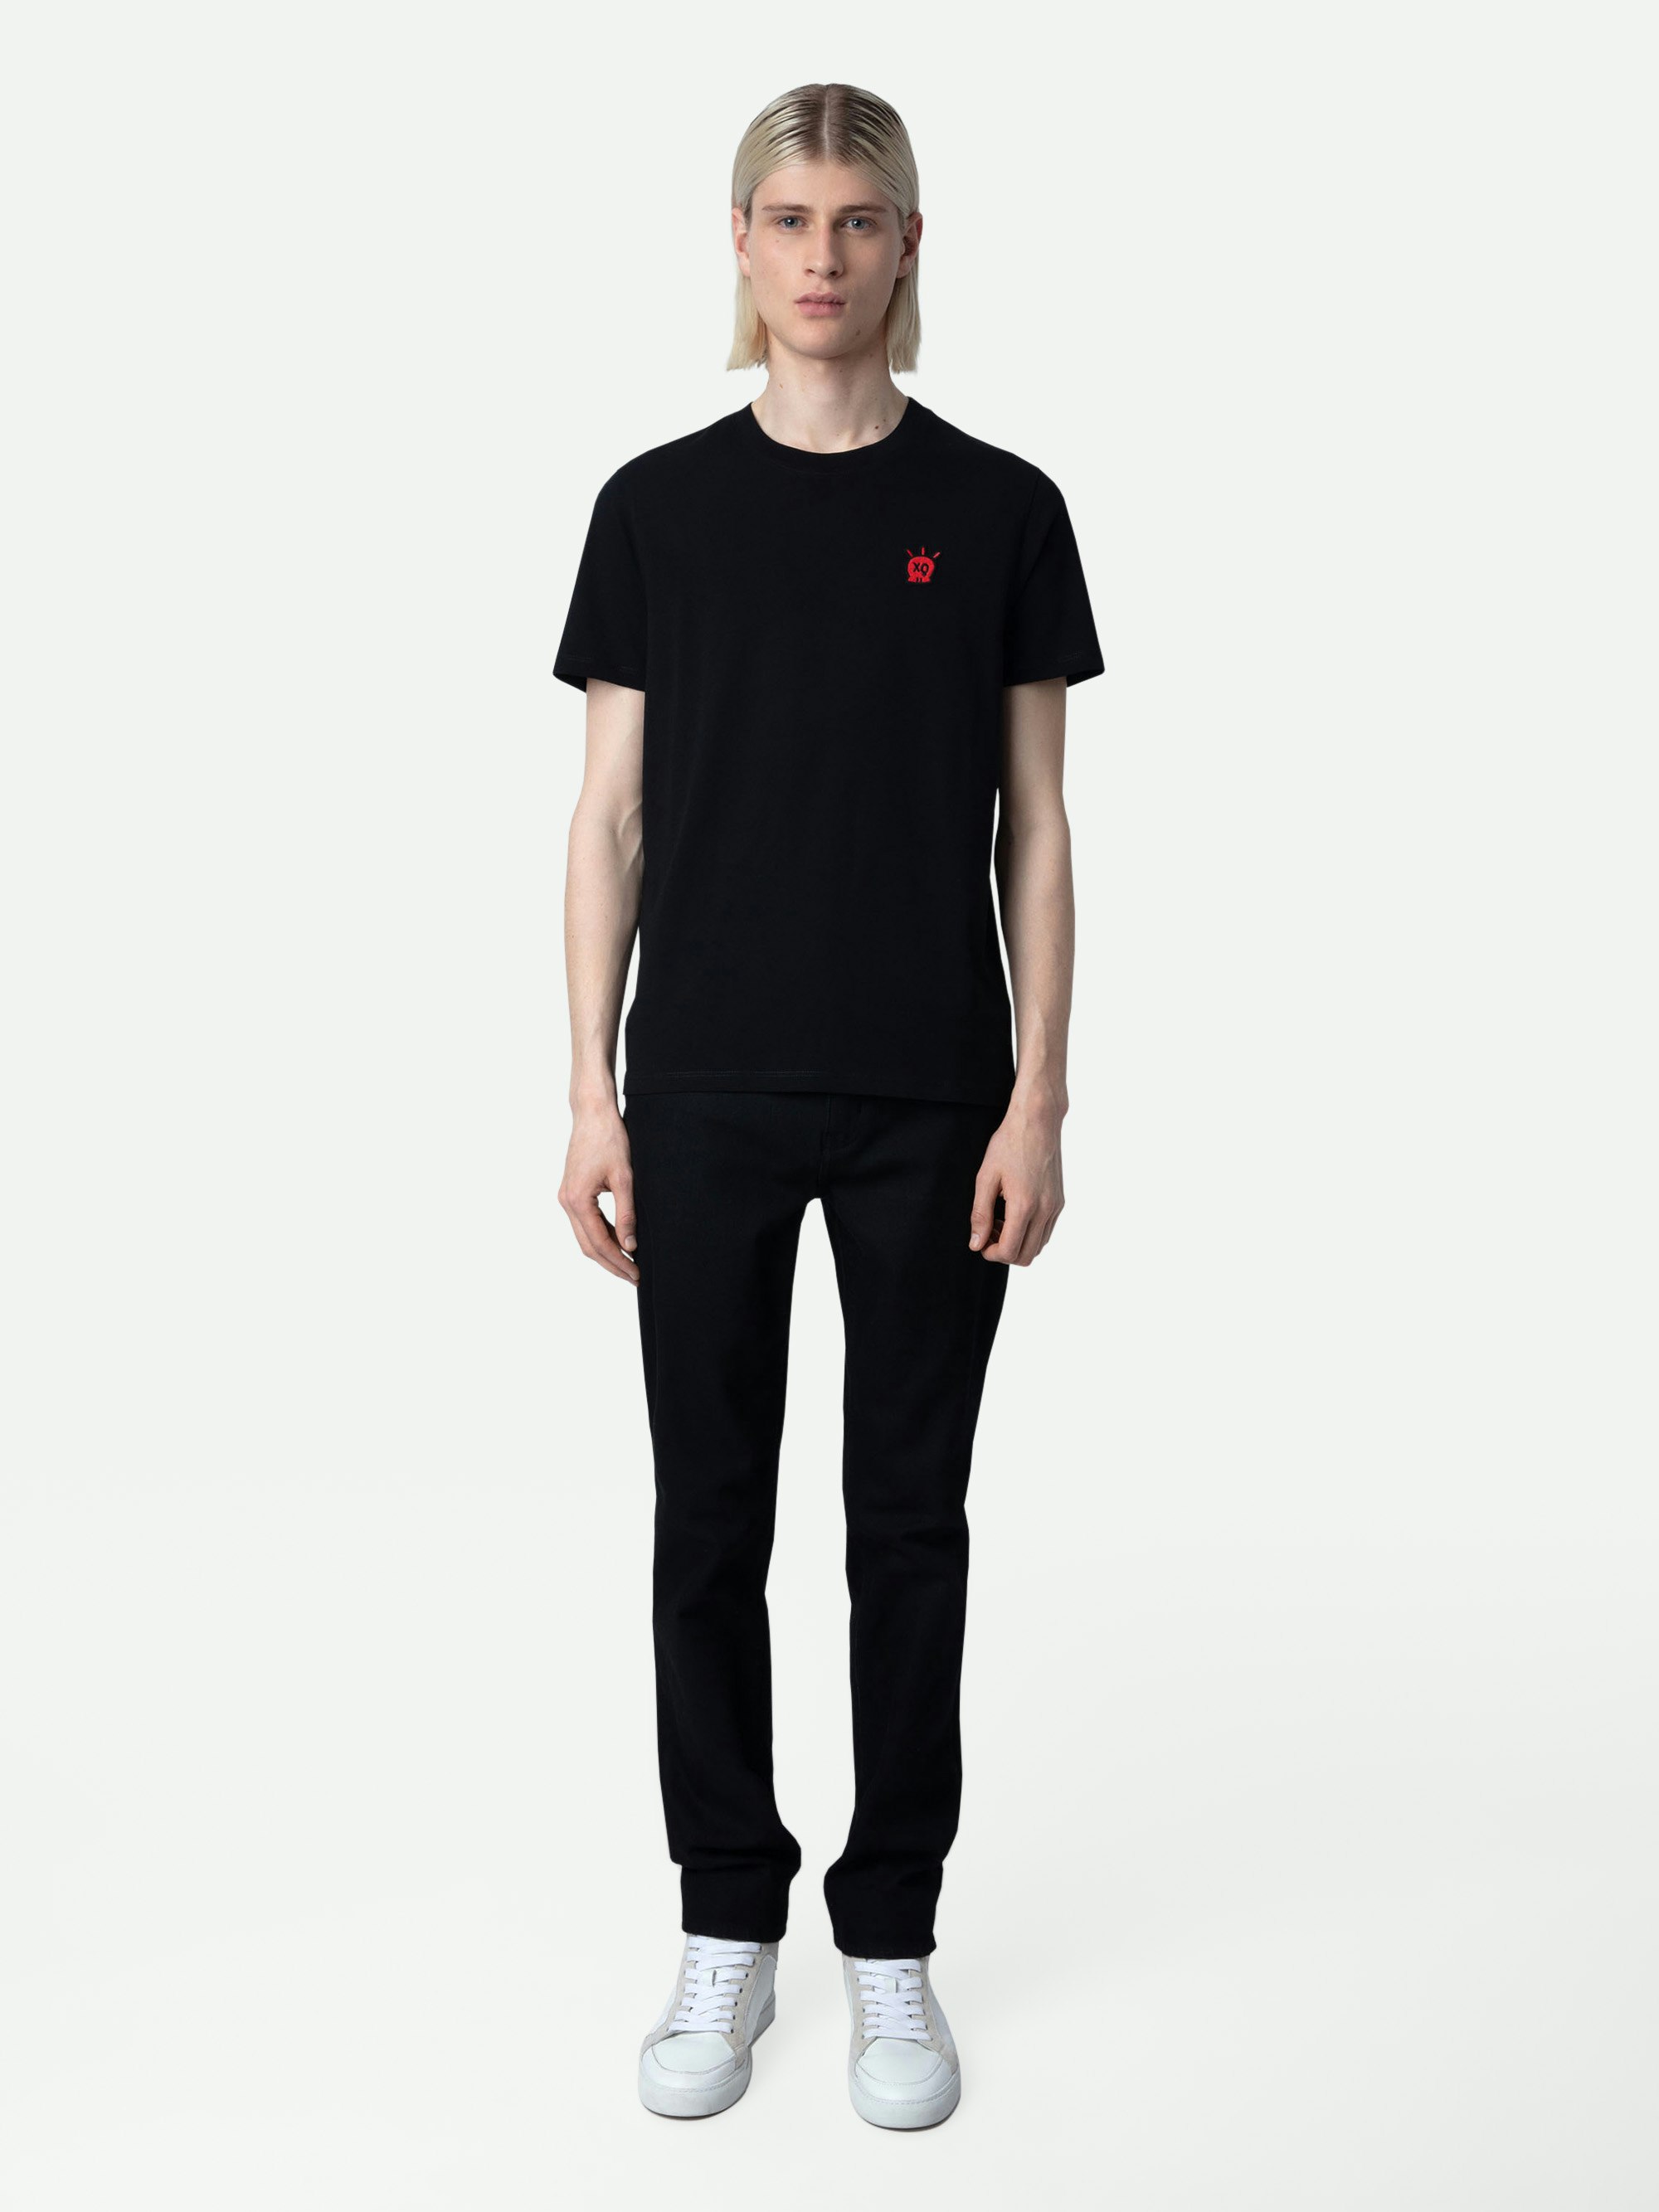 Tommy Skull XO T-shirt - Men's black cotton T-shirt featuring a Skull XO patch on the chest.